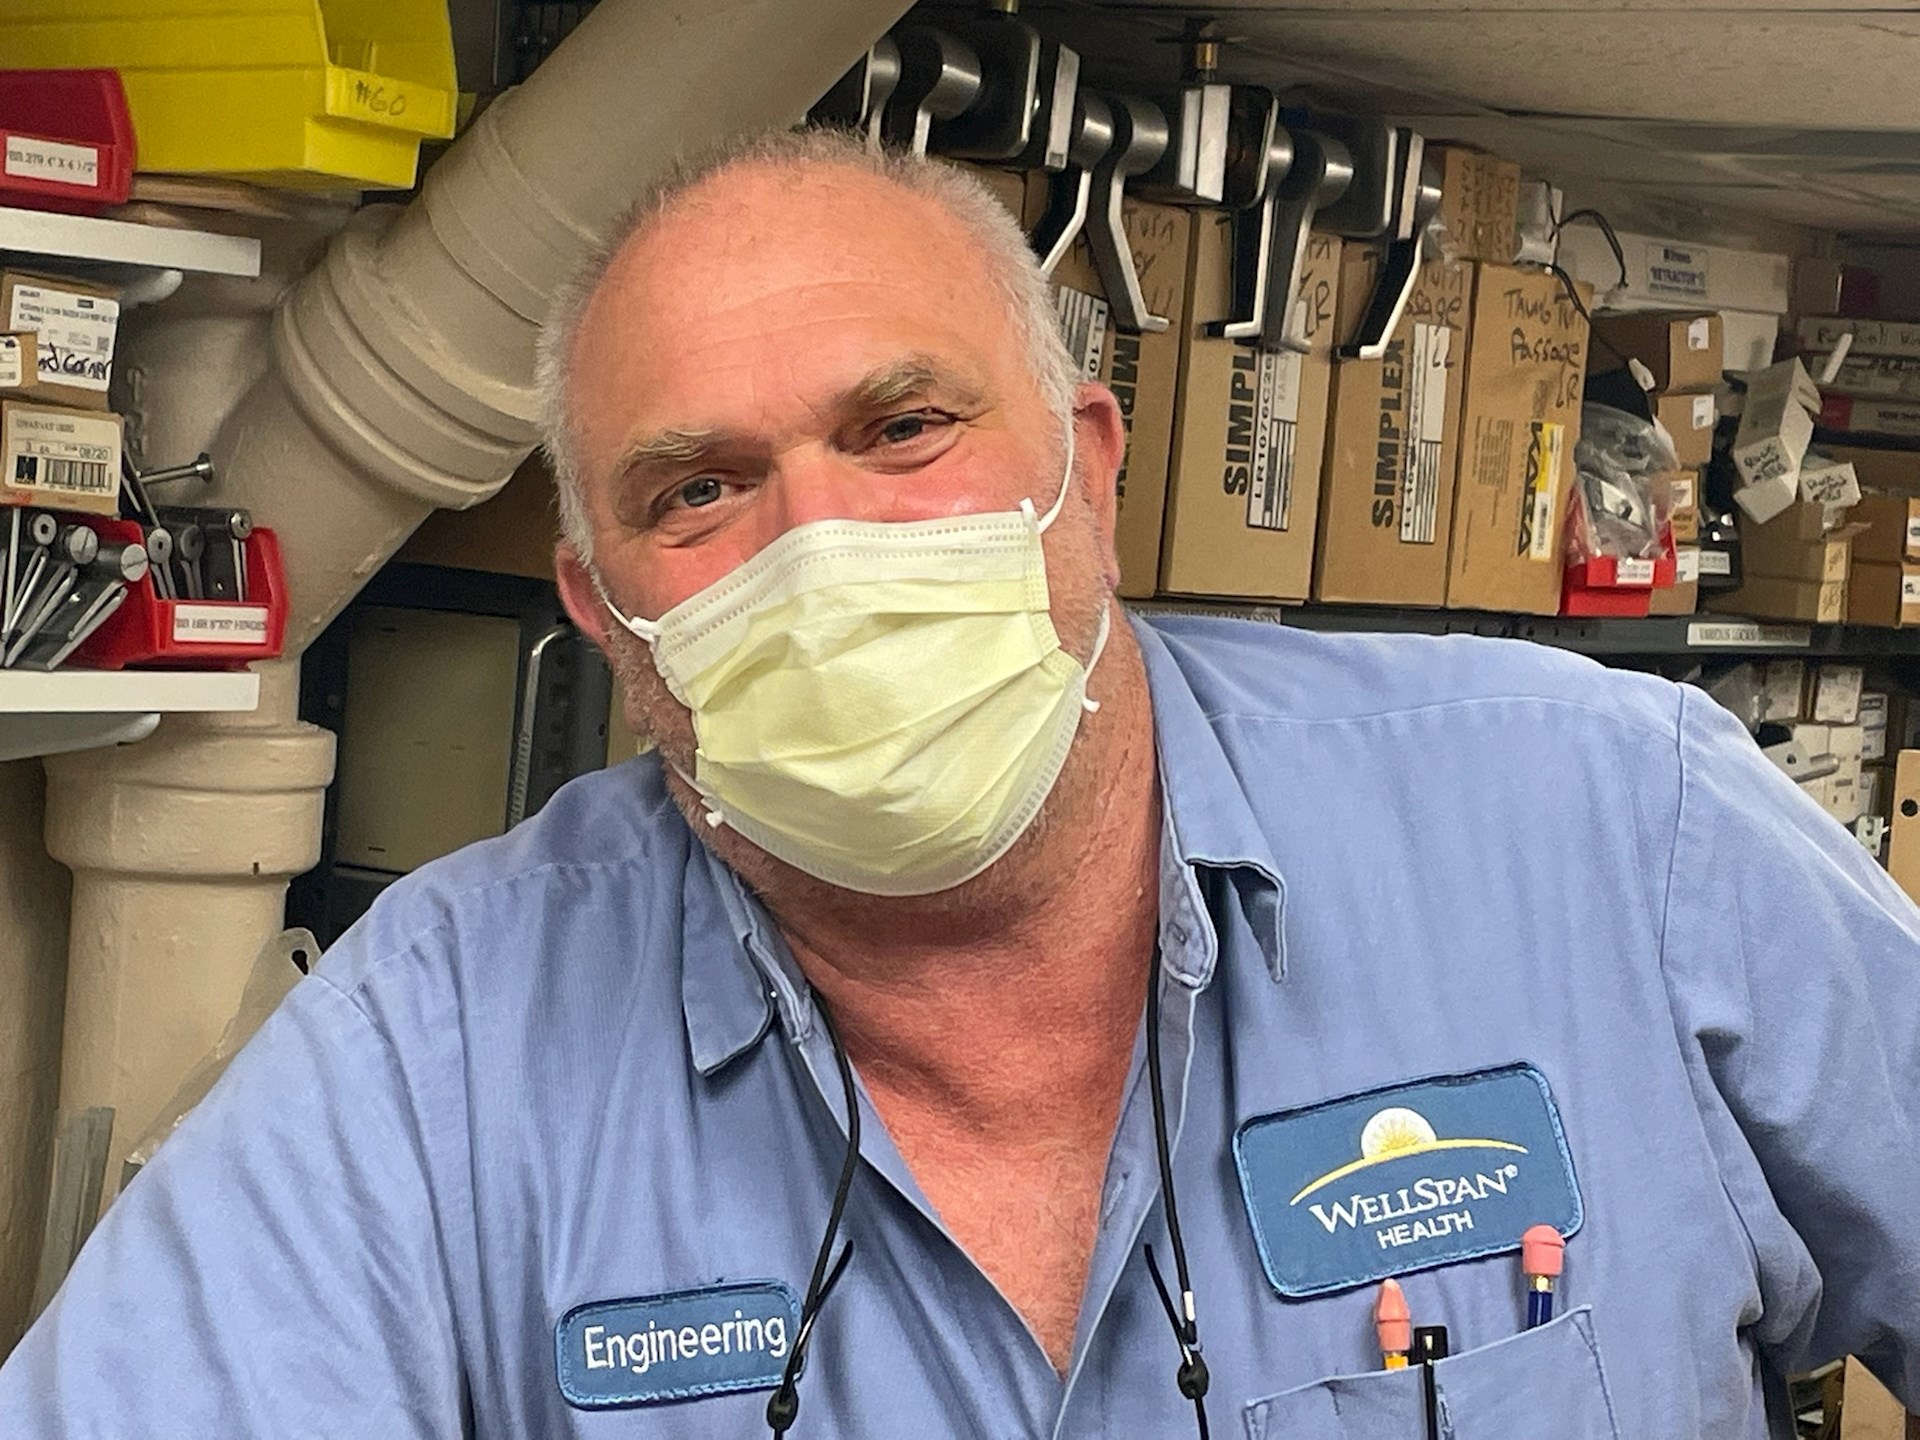 WellSpan team member Jeff Gross noticed a woman crying in an elevator at WellSpan York Hospital, and asked what he could do for her.